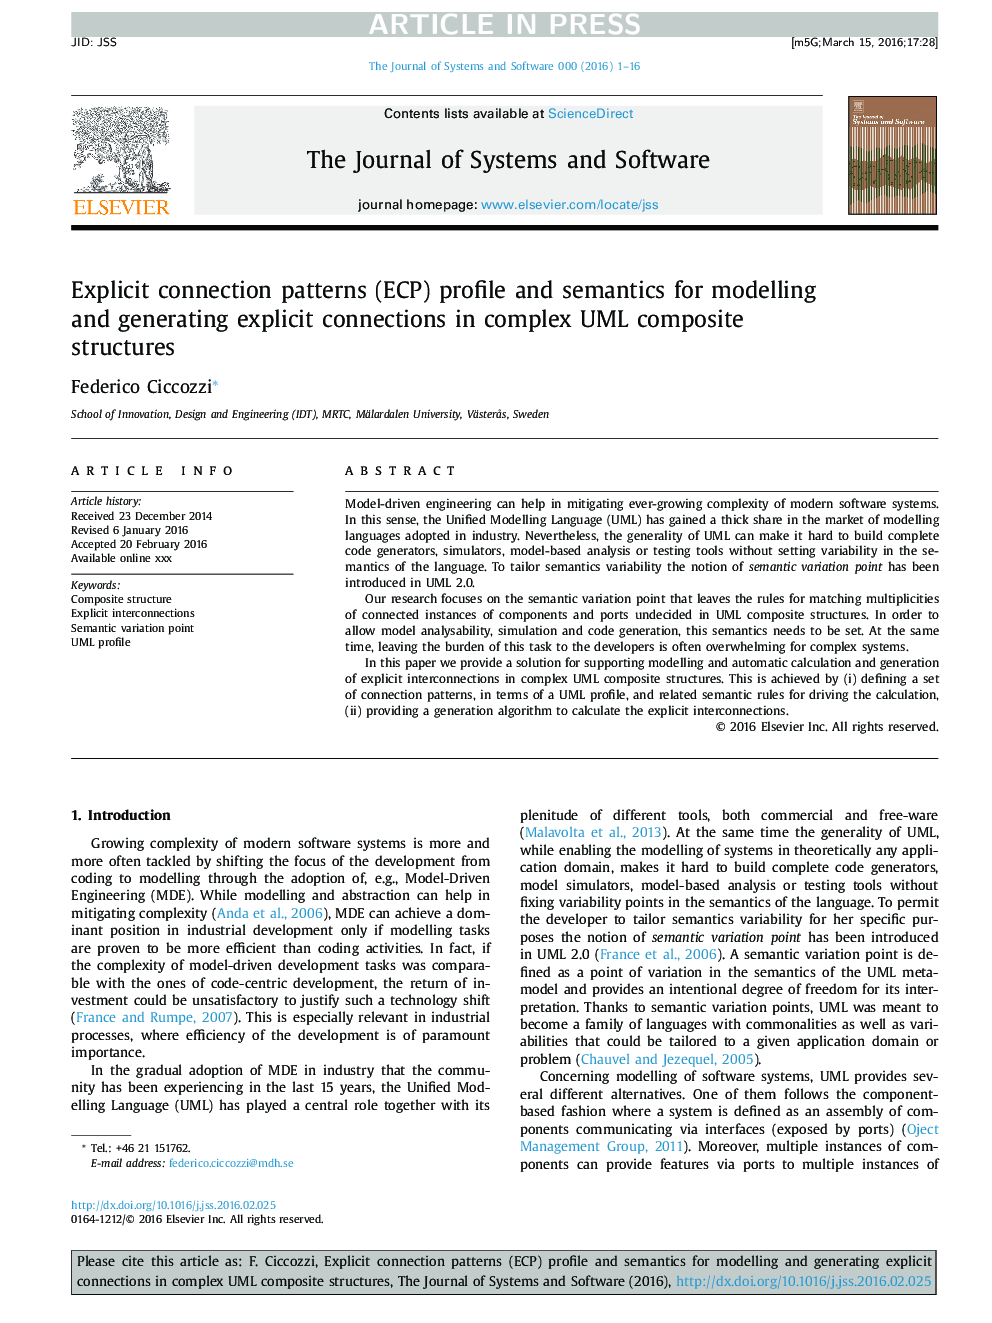 Explicit connection patterns (ECP) profile and semantics for modelling and generating explicit connections in complex UML composite structures